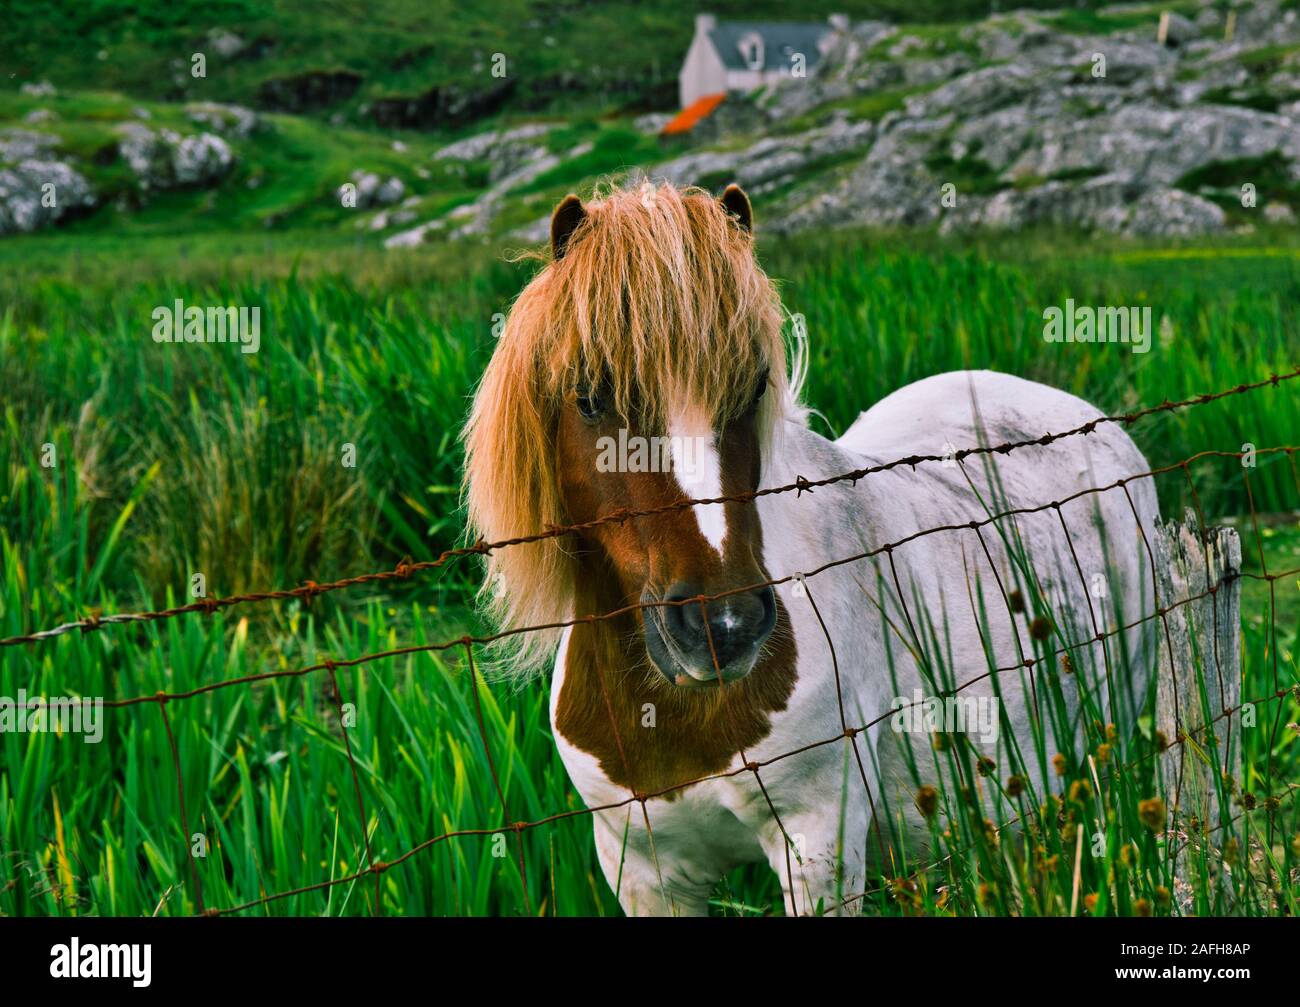 Shetland pony standing next to barbed wire fence, Isle of Harris, Outer Hebrides, Scotland Stock Photo